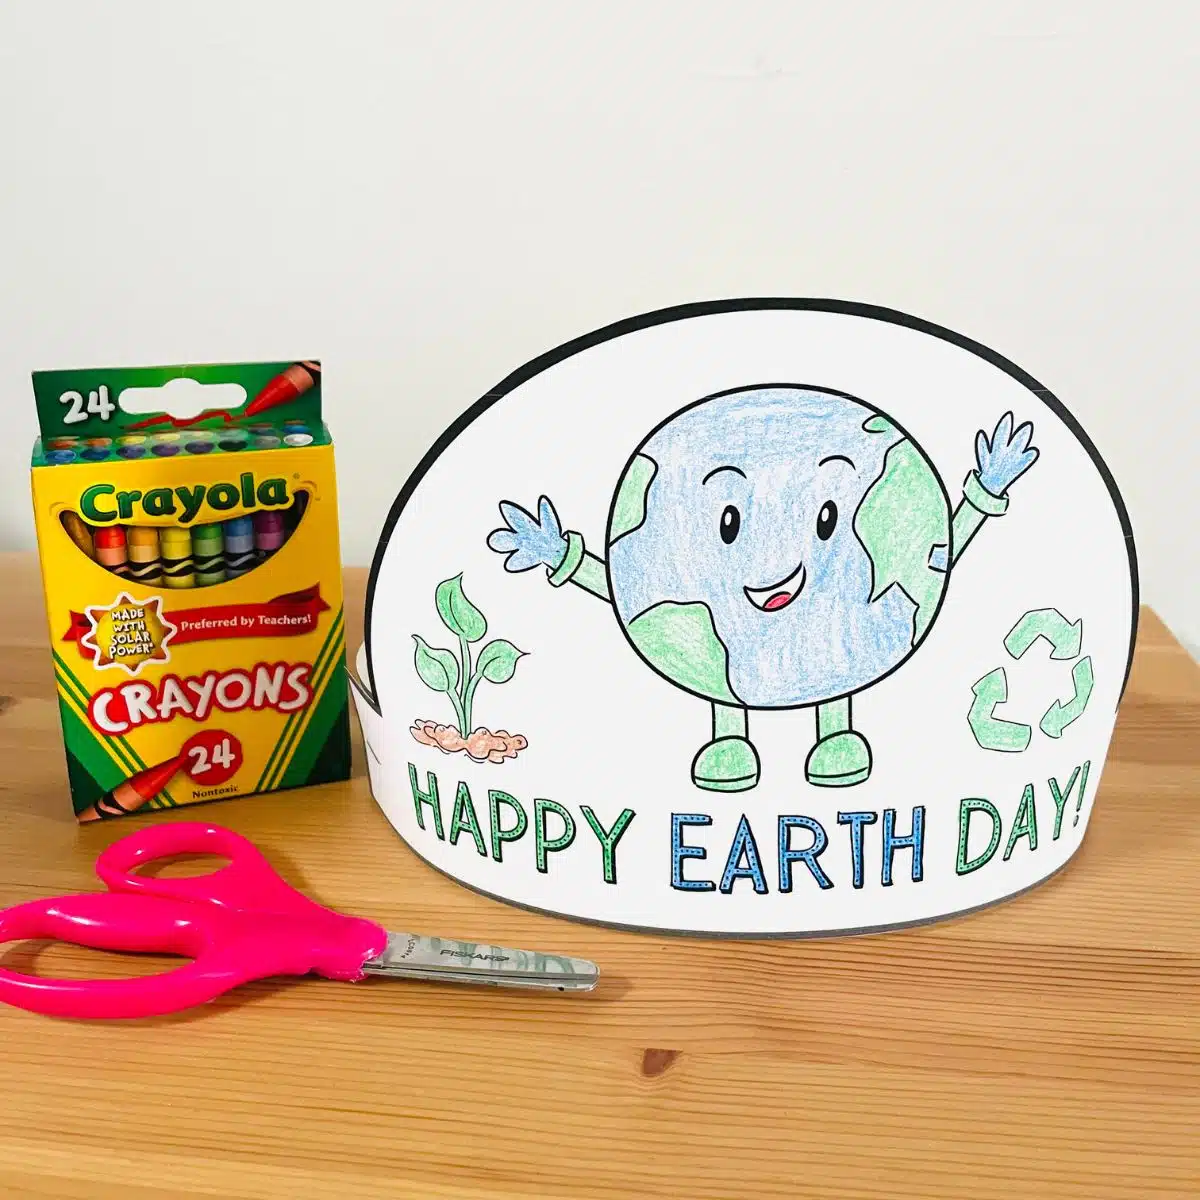 An earth day hat colored with green and blue next to a box of crayons and scissors